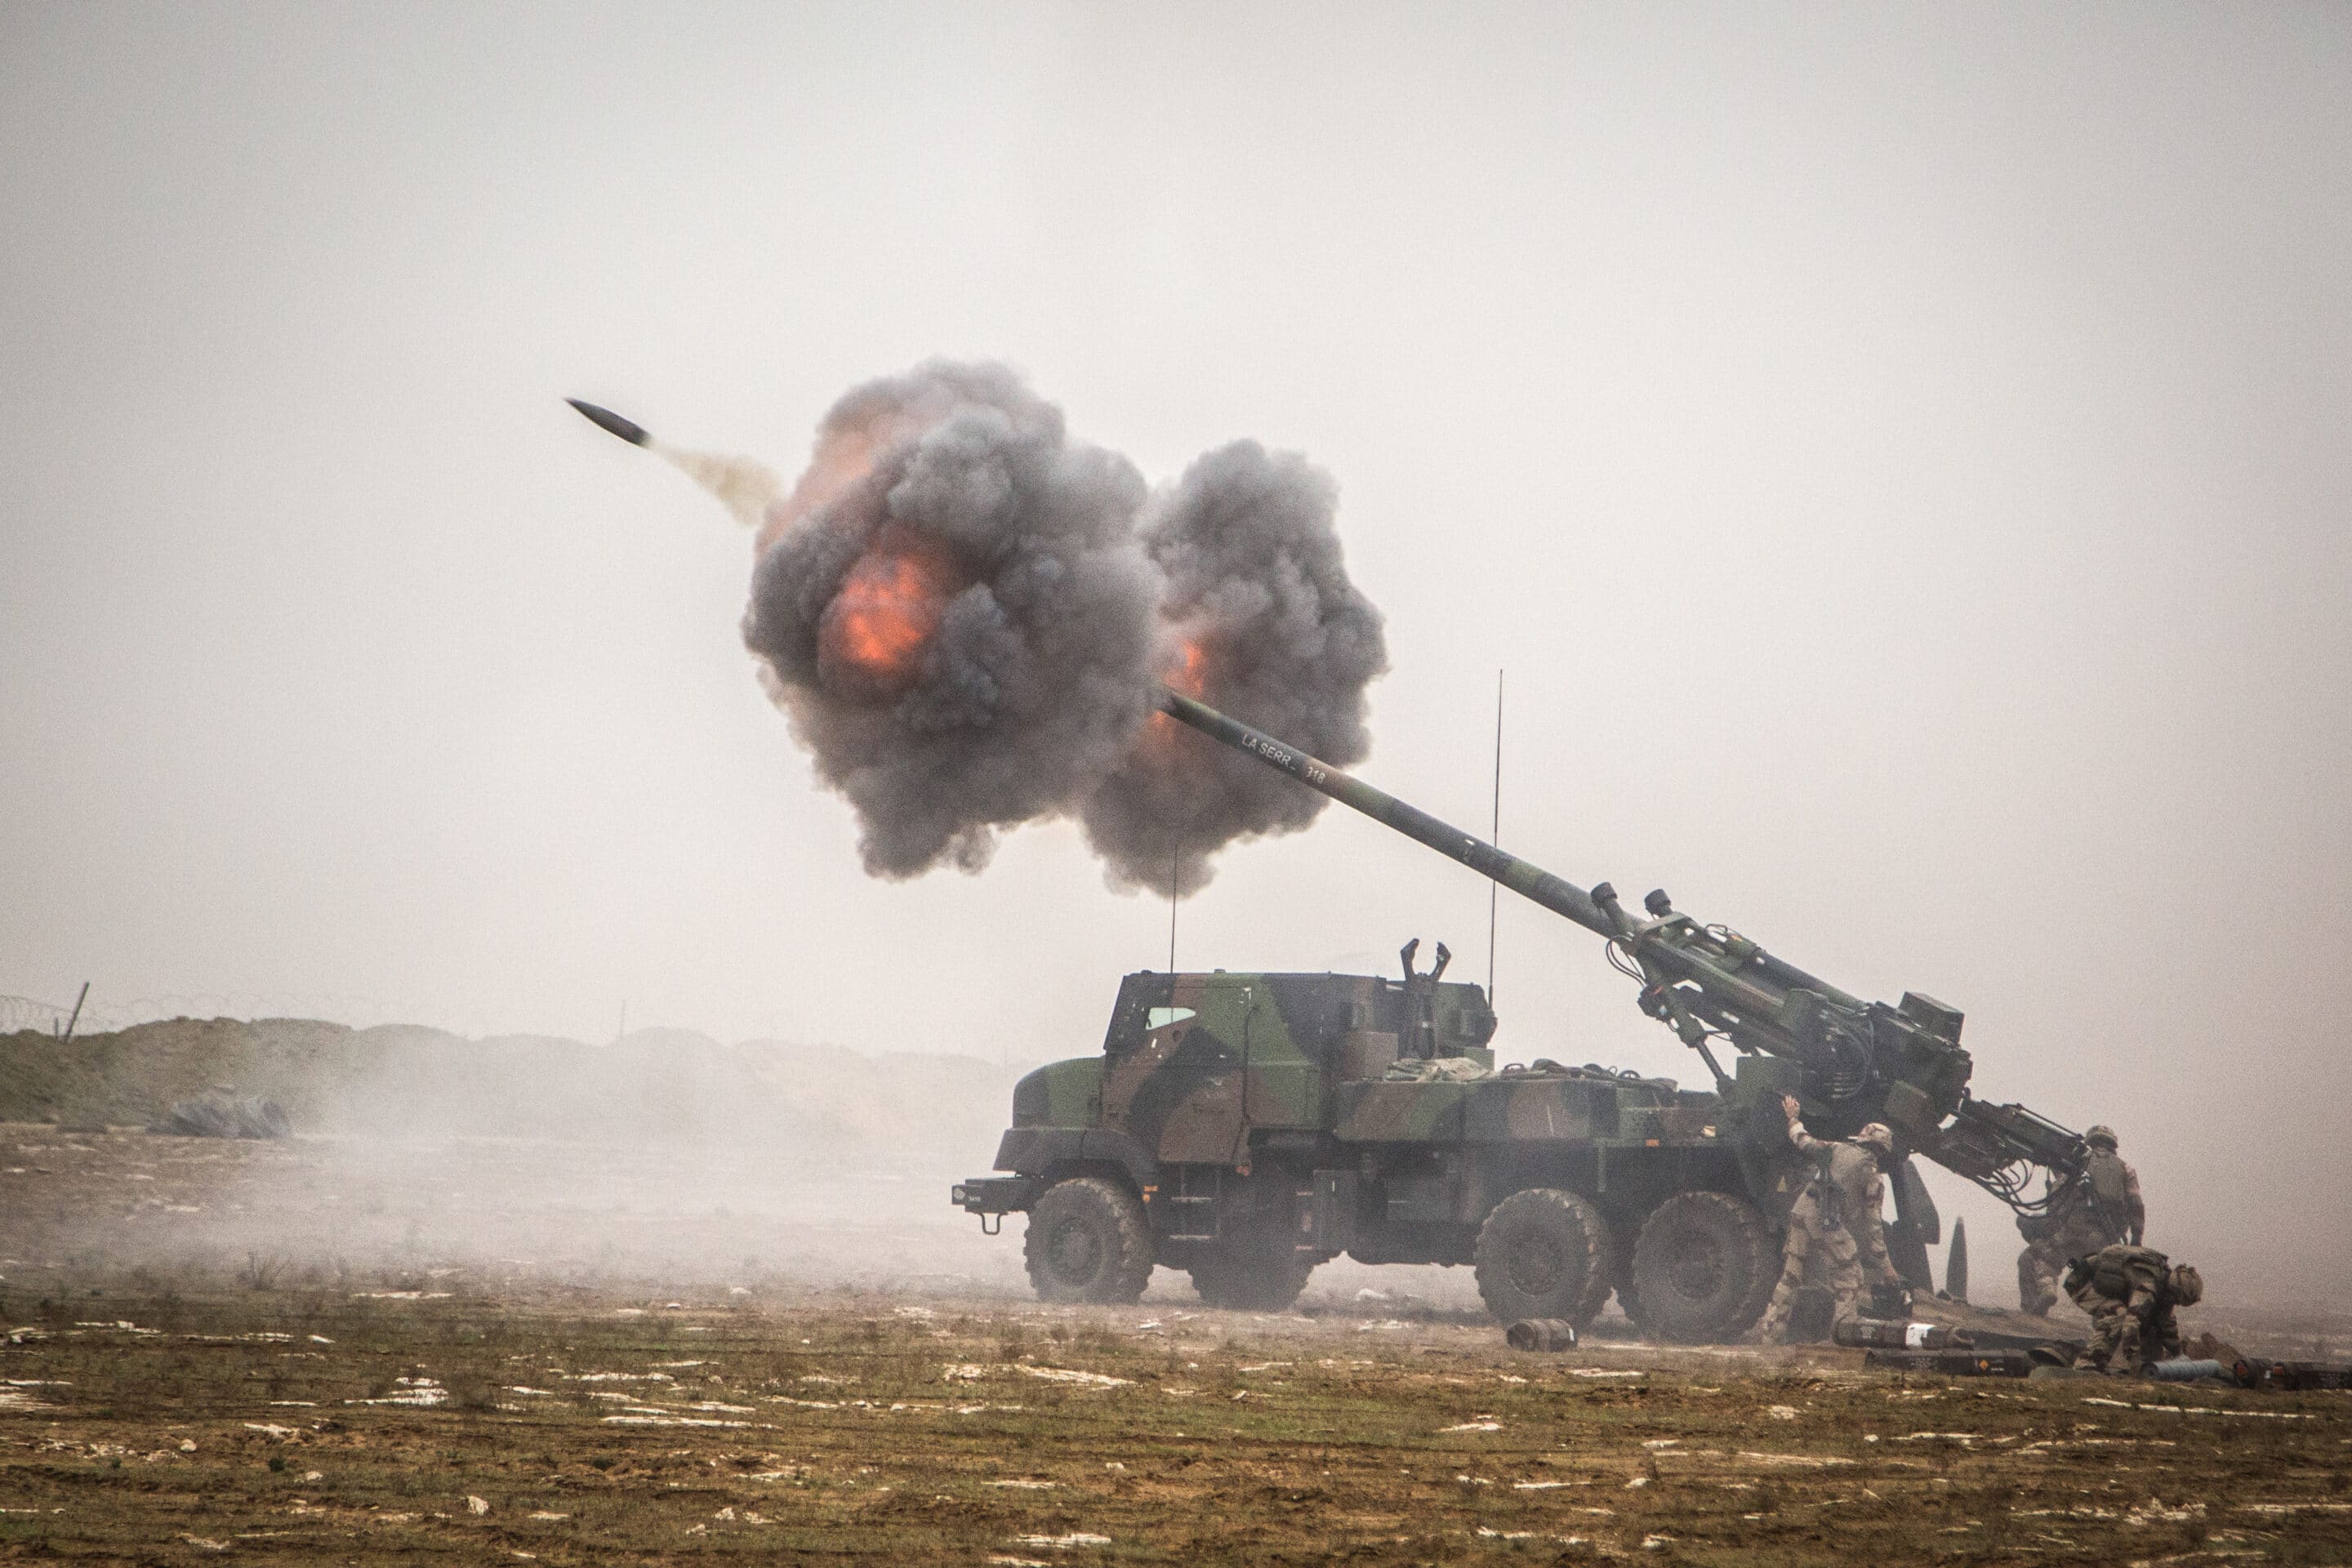 A French Caesar self-propelled howitzer fires into the Middle Euphrates River Valley in Southwest Asia, Dec. 2, 2018. (U.S. Army photo by Sgt. 1st Class Mikki L. Sprenkle)